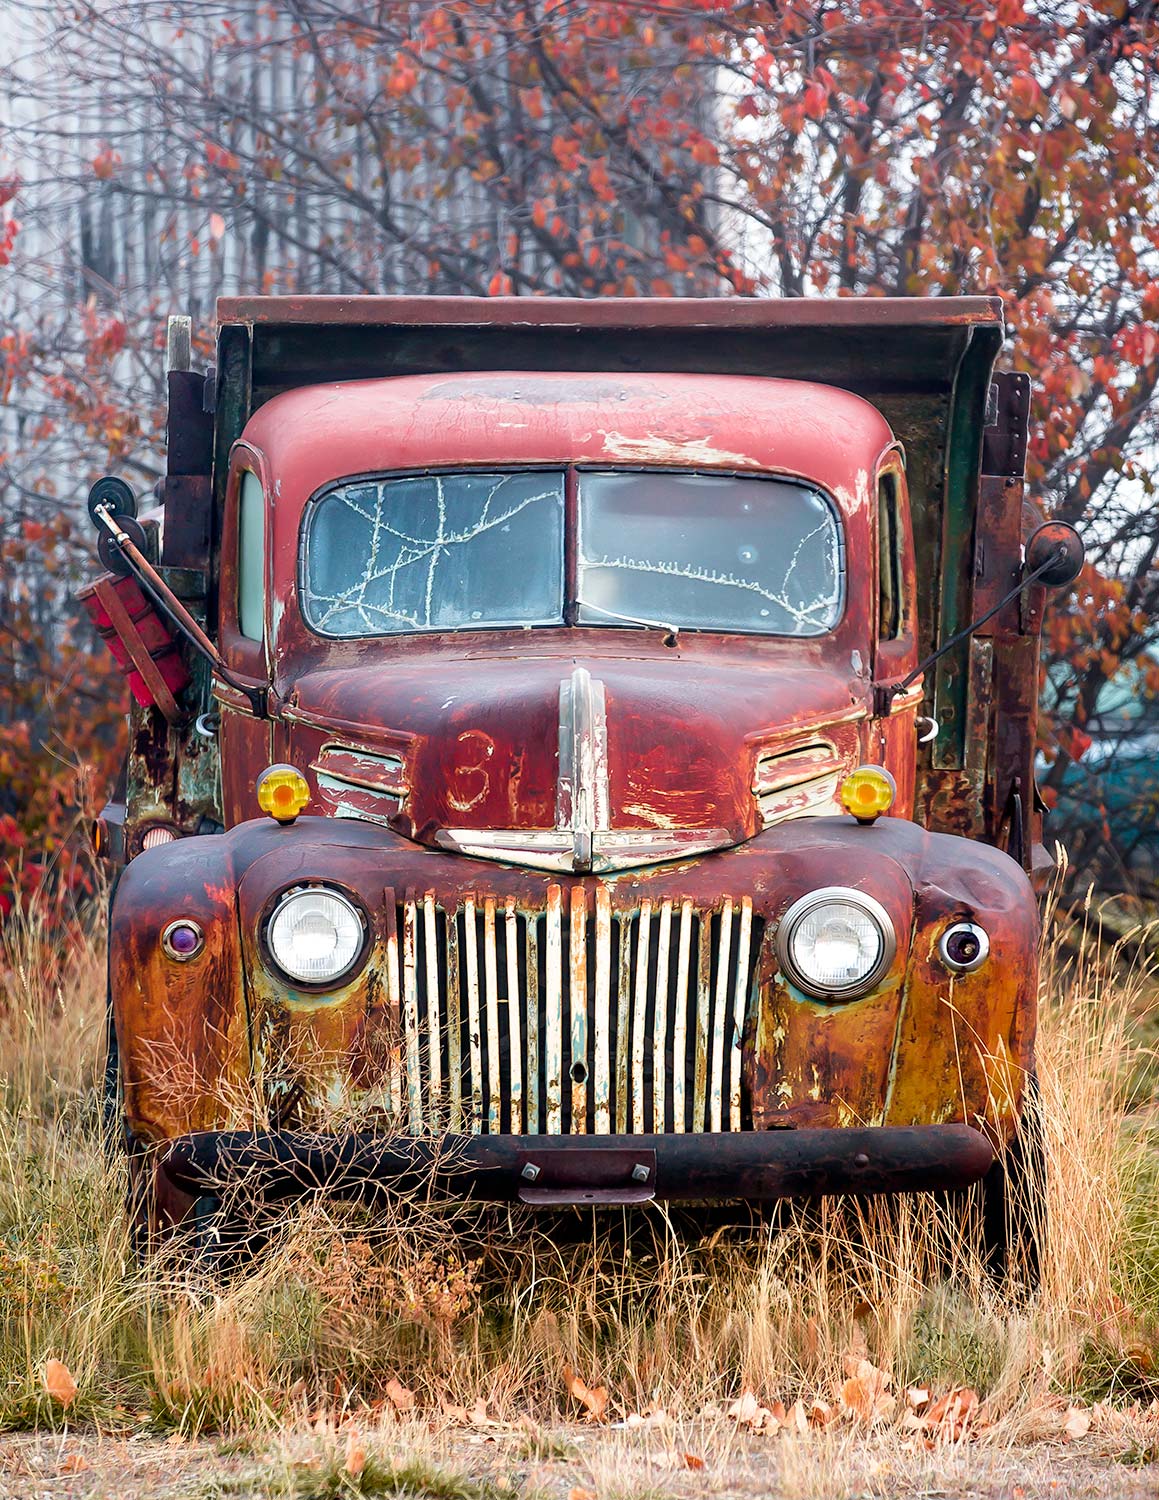 Old Abandoned Truck